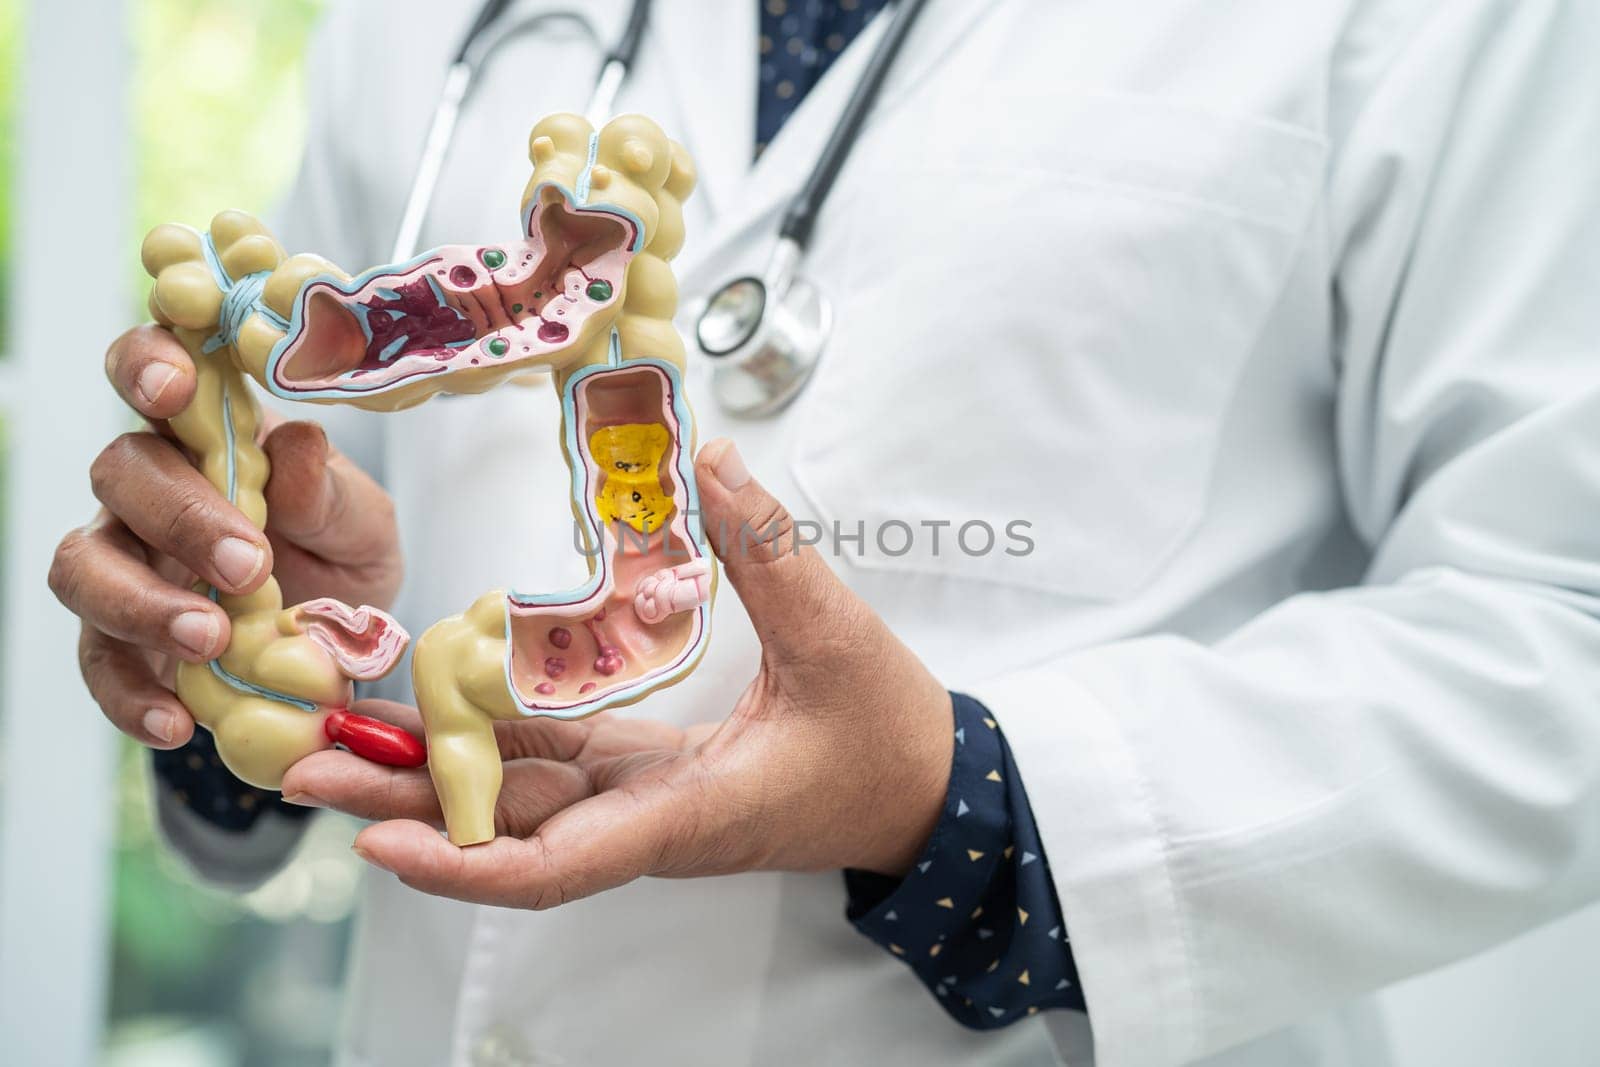 Intestine, appendix and digestive system, doctor holding anatomy model for study diagnosis and treatment in hospital.